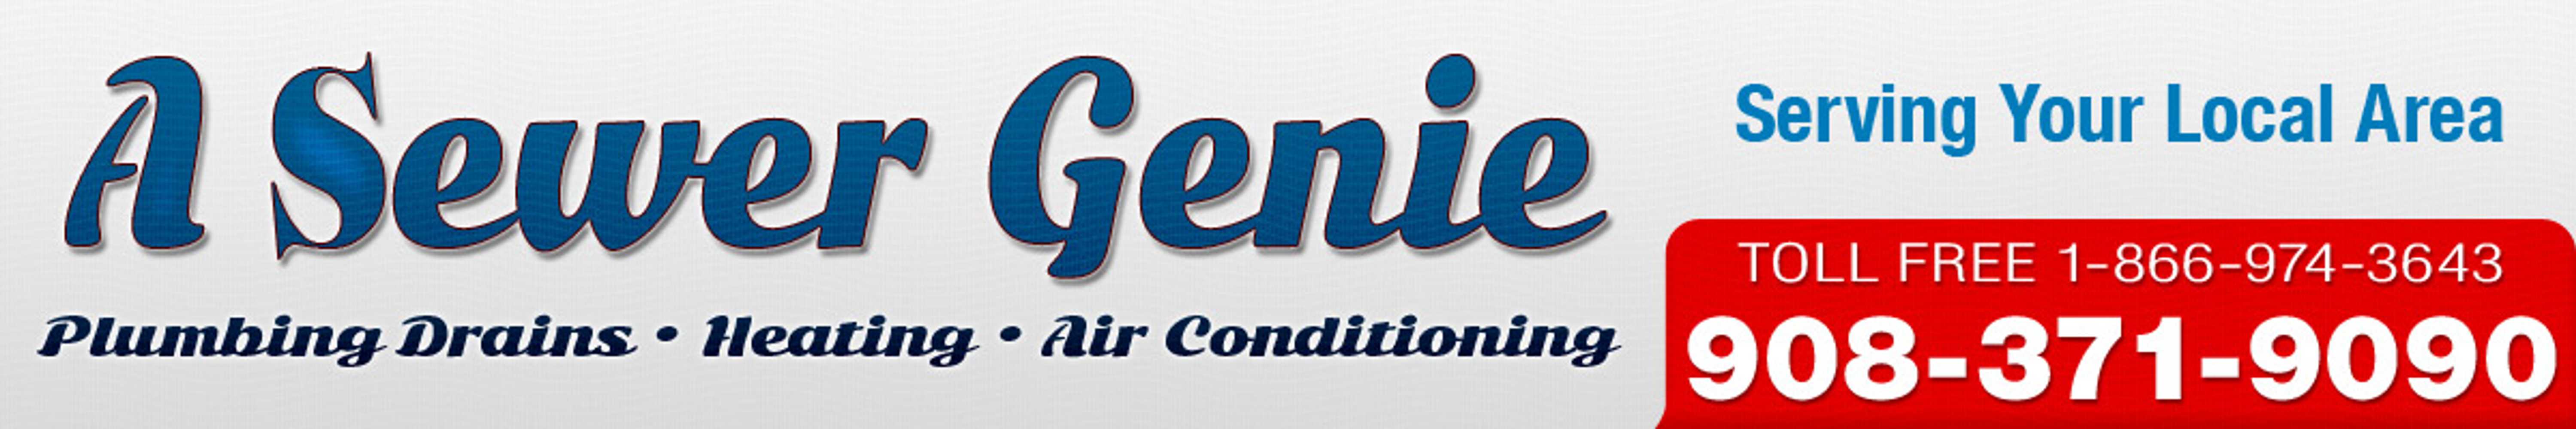 A Sewer Genie Sewer & Drain Heating & Air Conditioning 